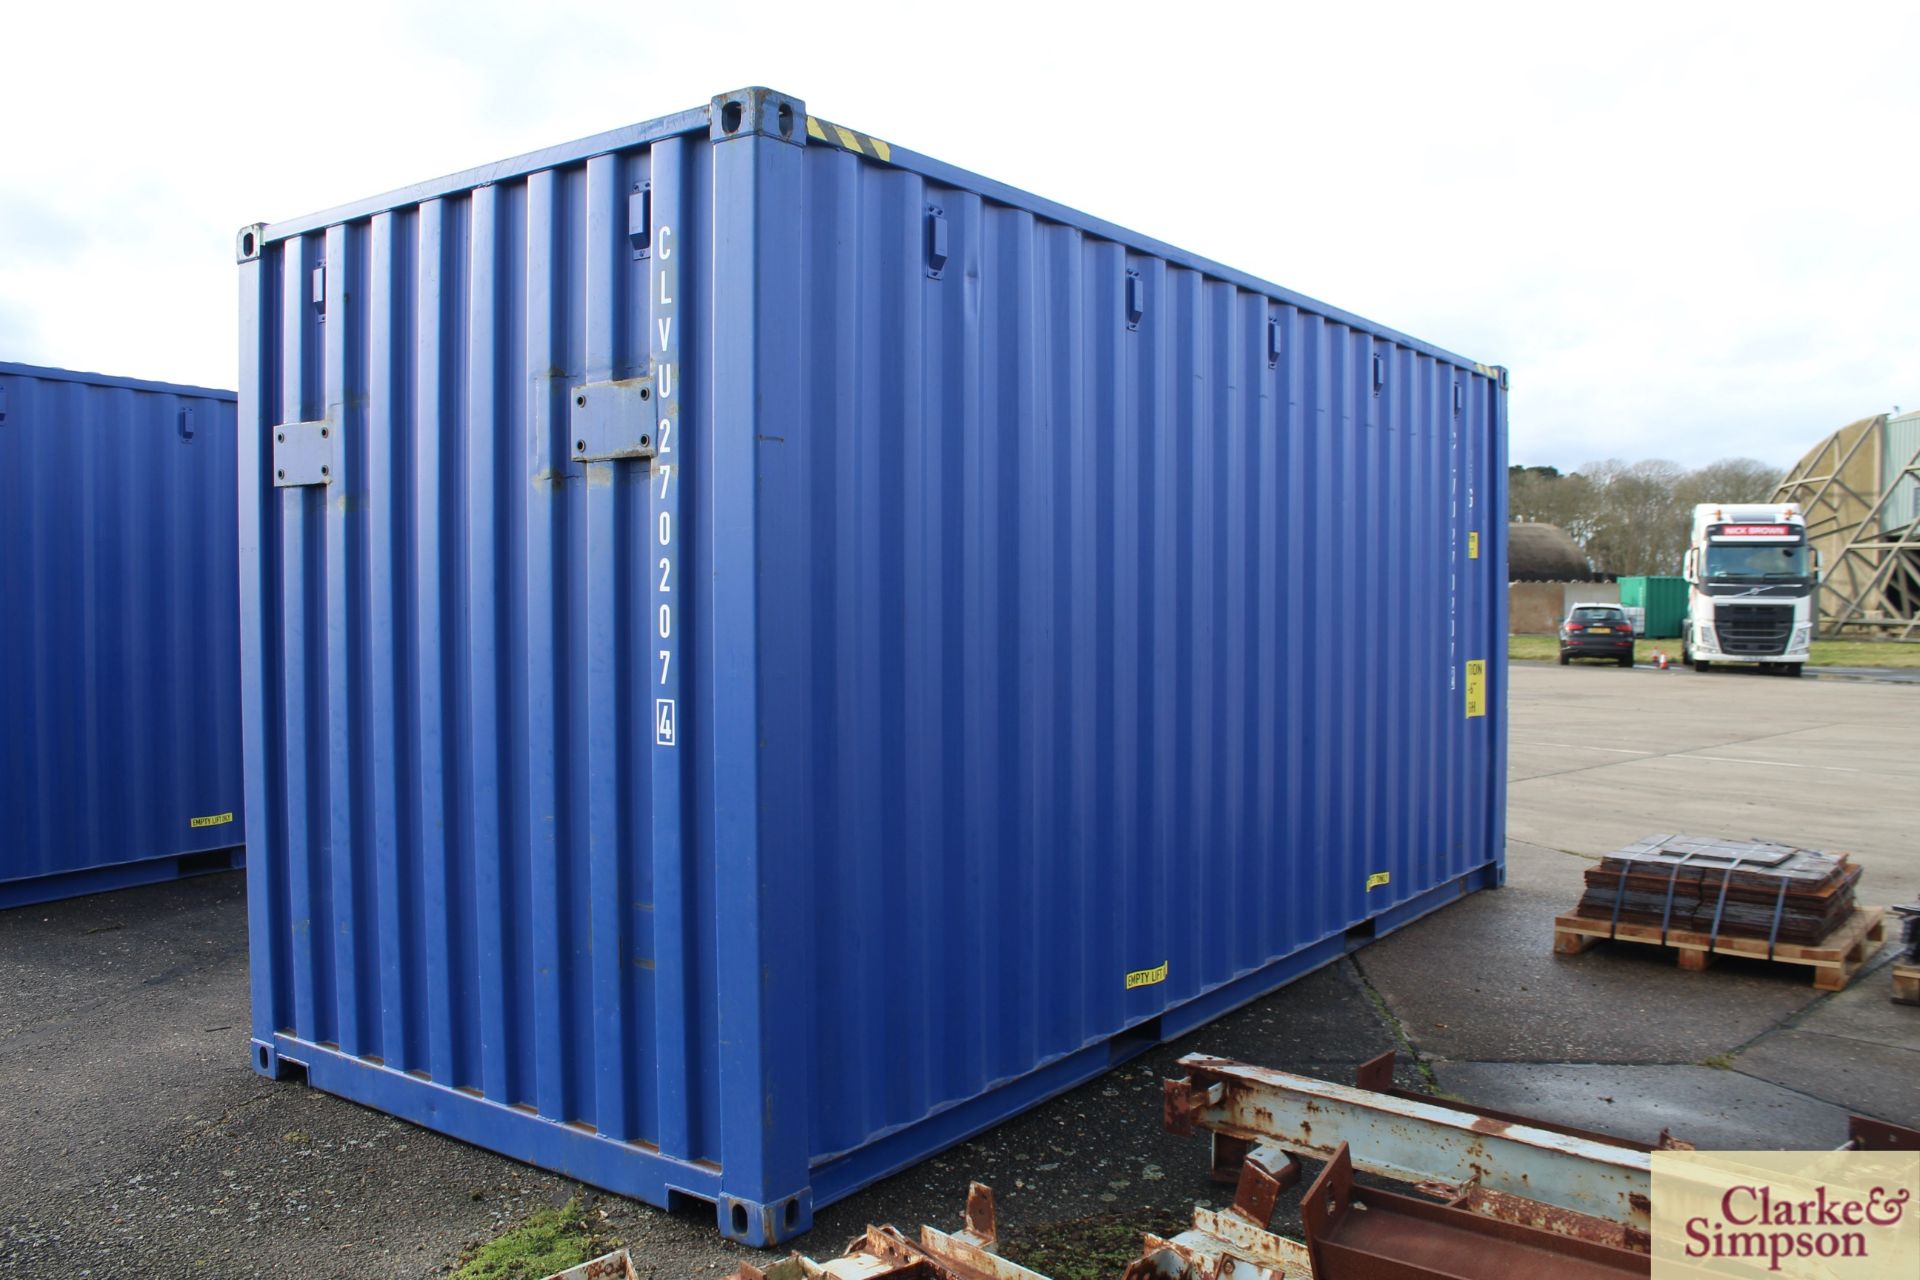 20ft x 9ft6in high shipping container. 2019. Partially reinforced to interior to include plates - Image 4 of 19